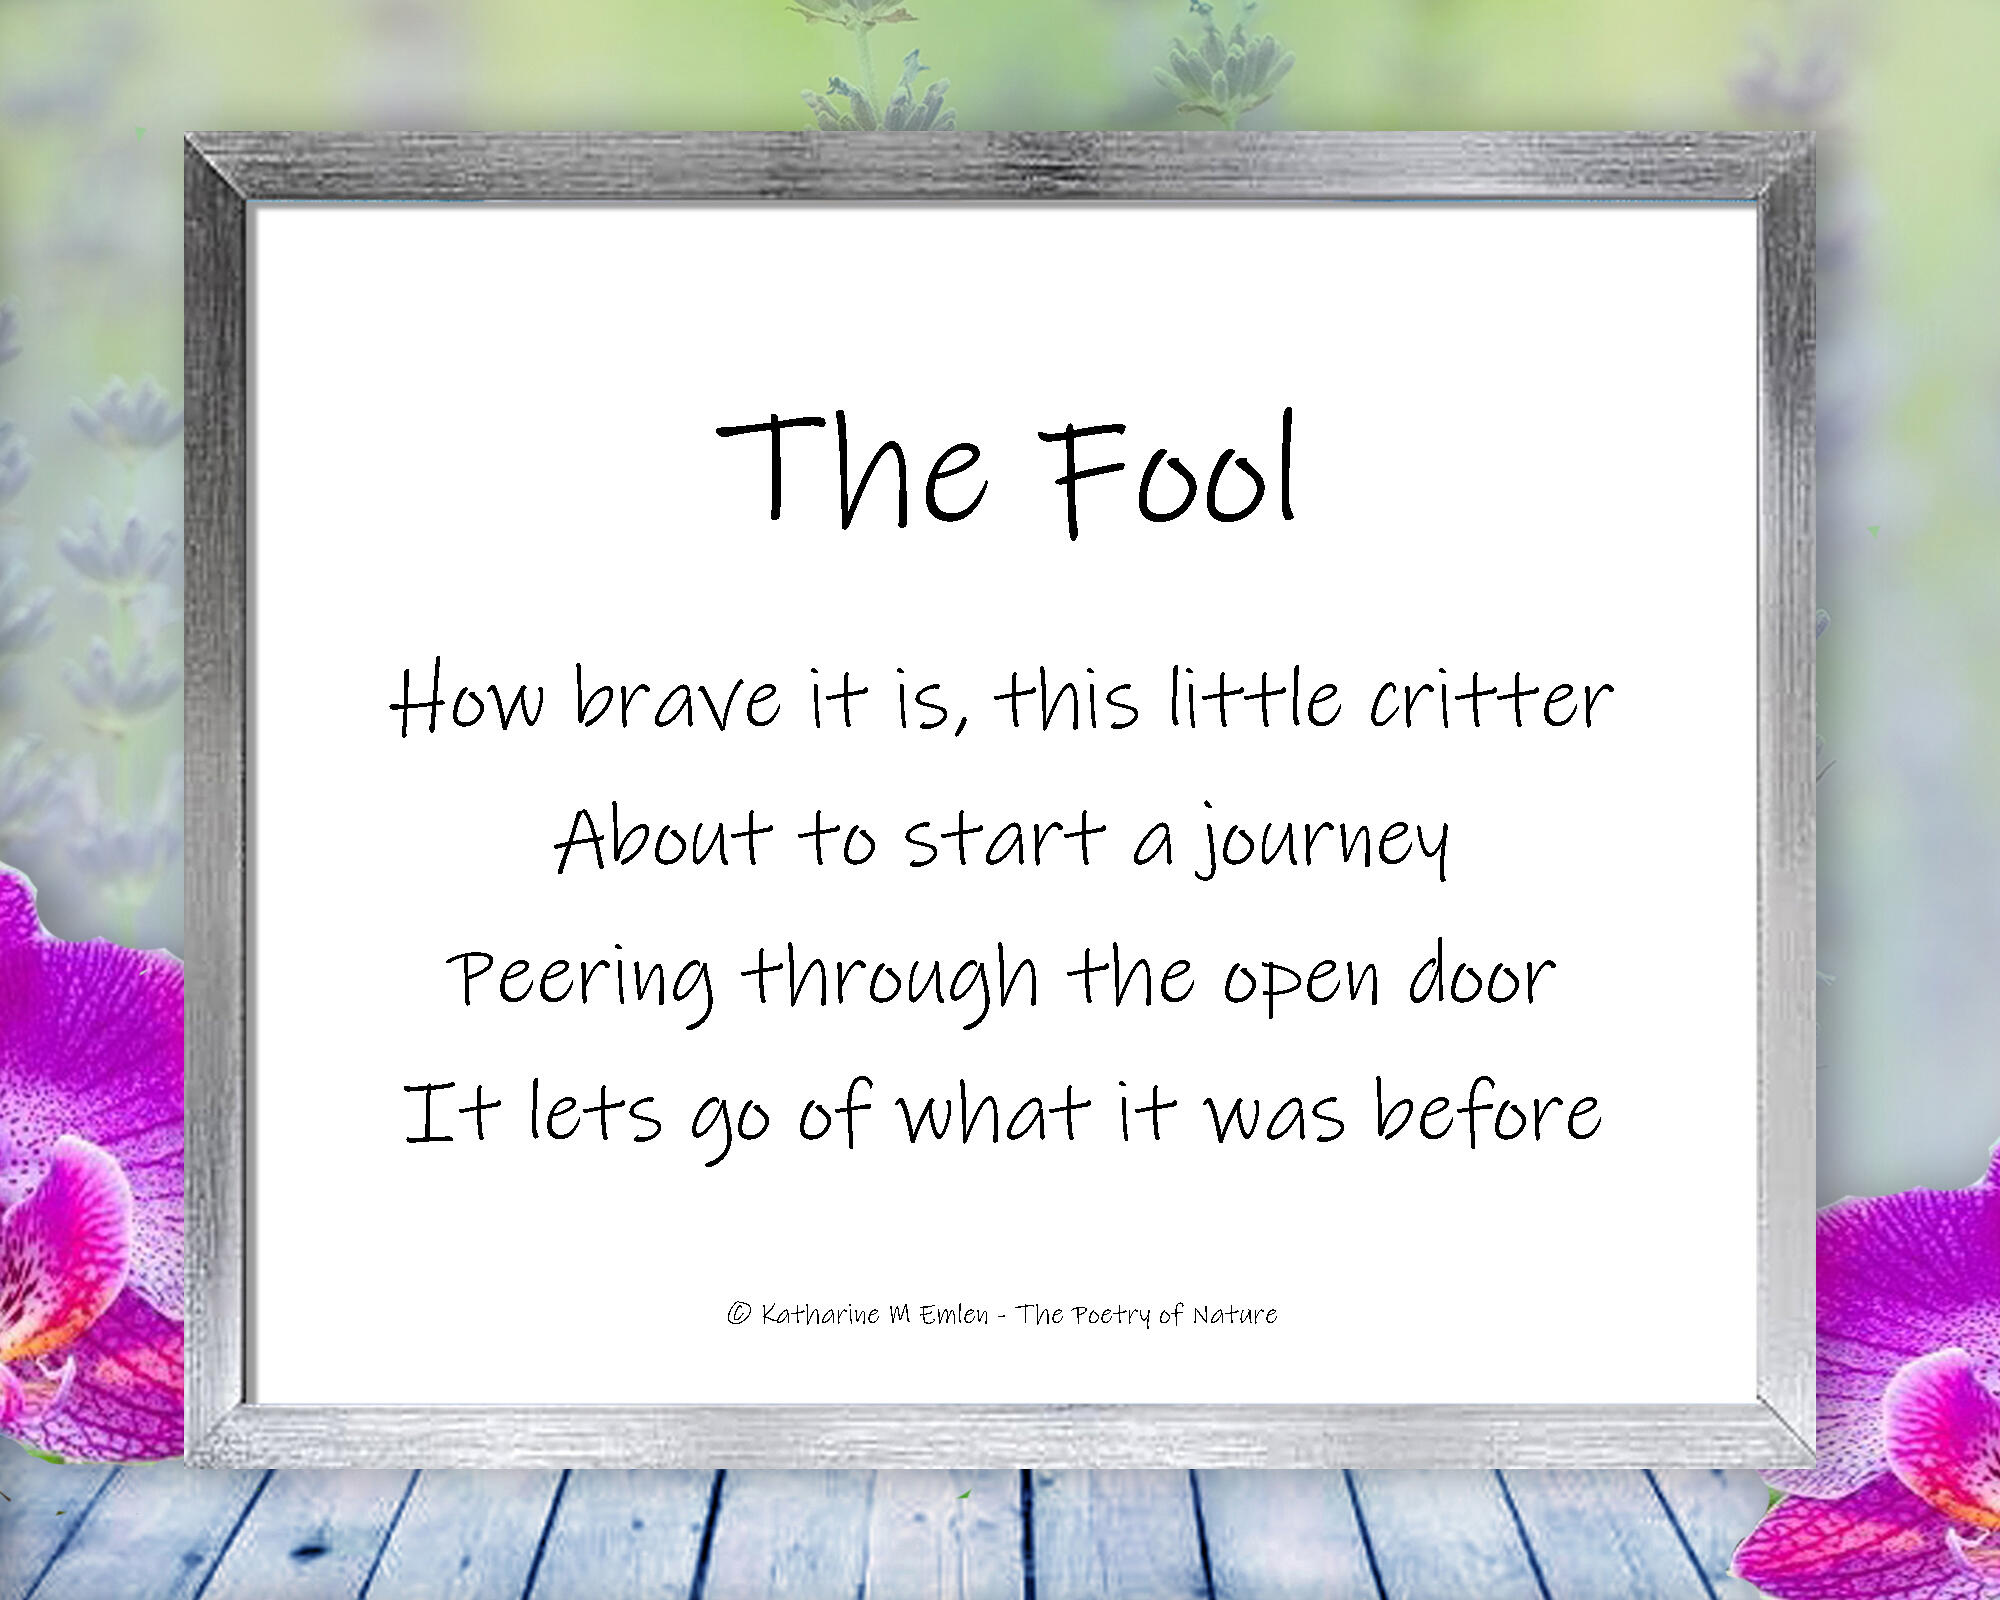 Poem for The Fool - A twisted tendril vine resembles The Fool from Tarot in this peaceful, soothing, nature spirit story. Print with poem.-The Fool by The Poetry of Nature